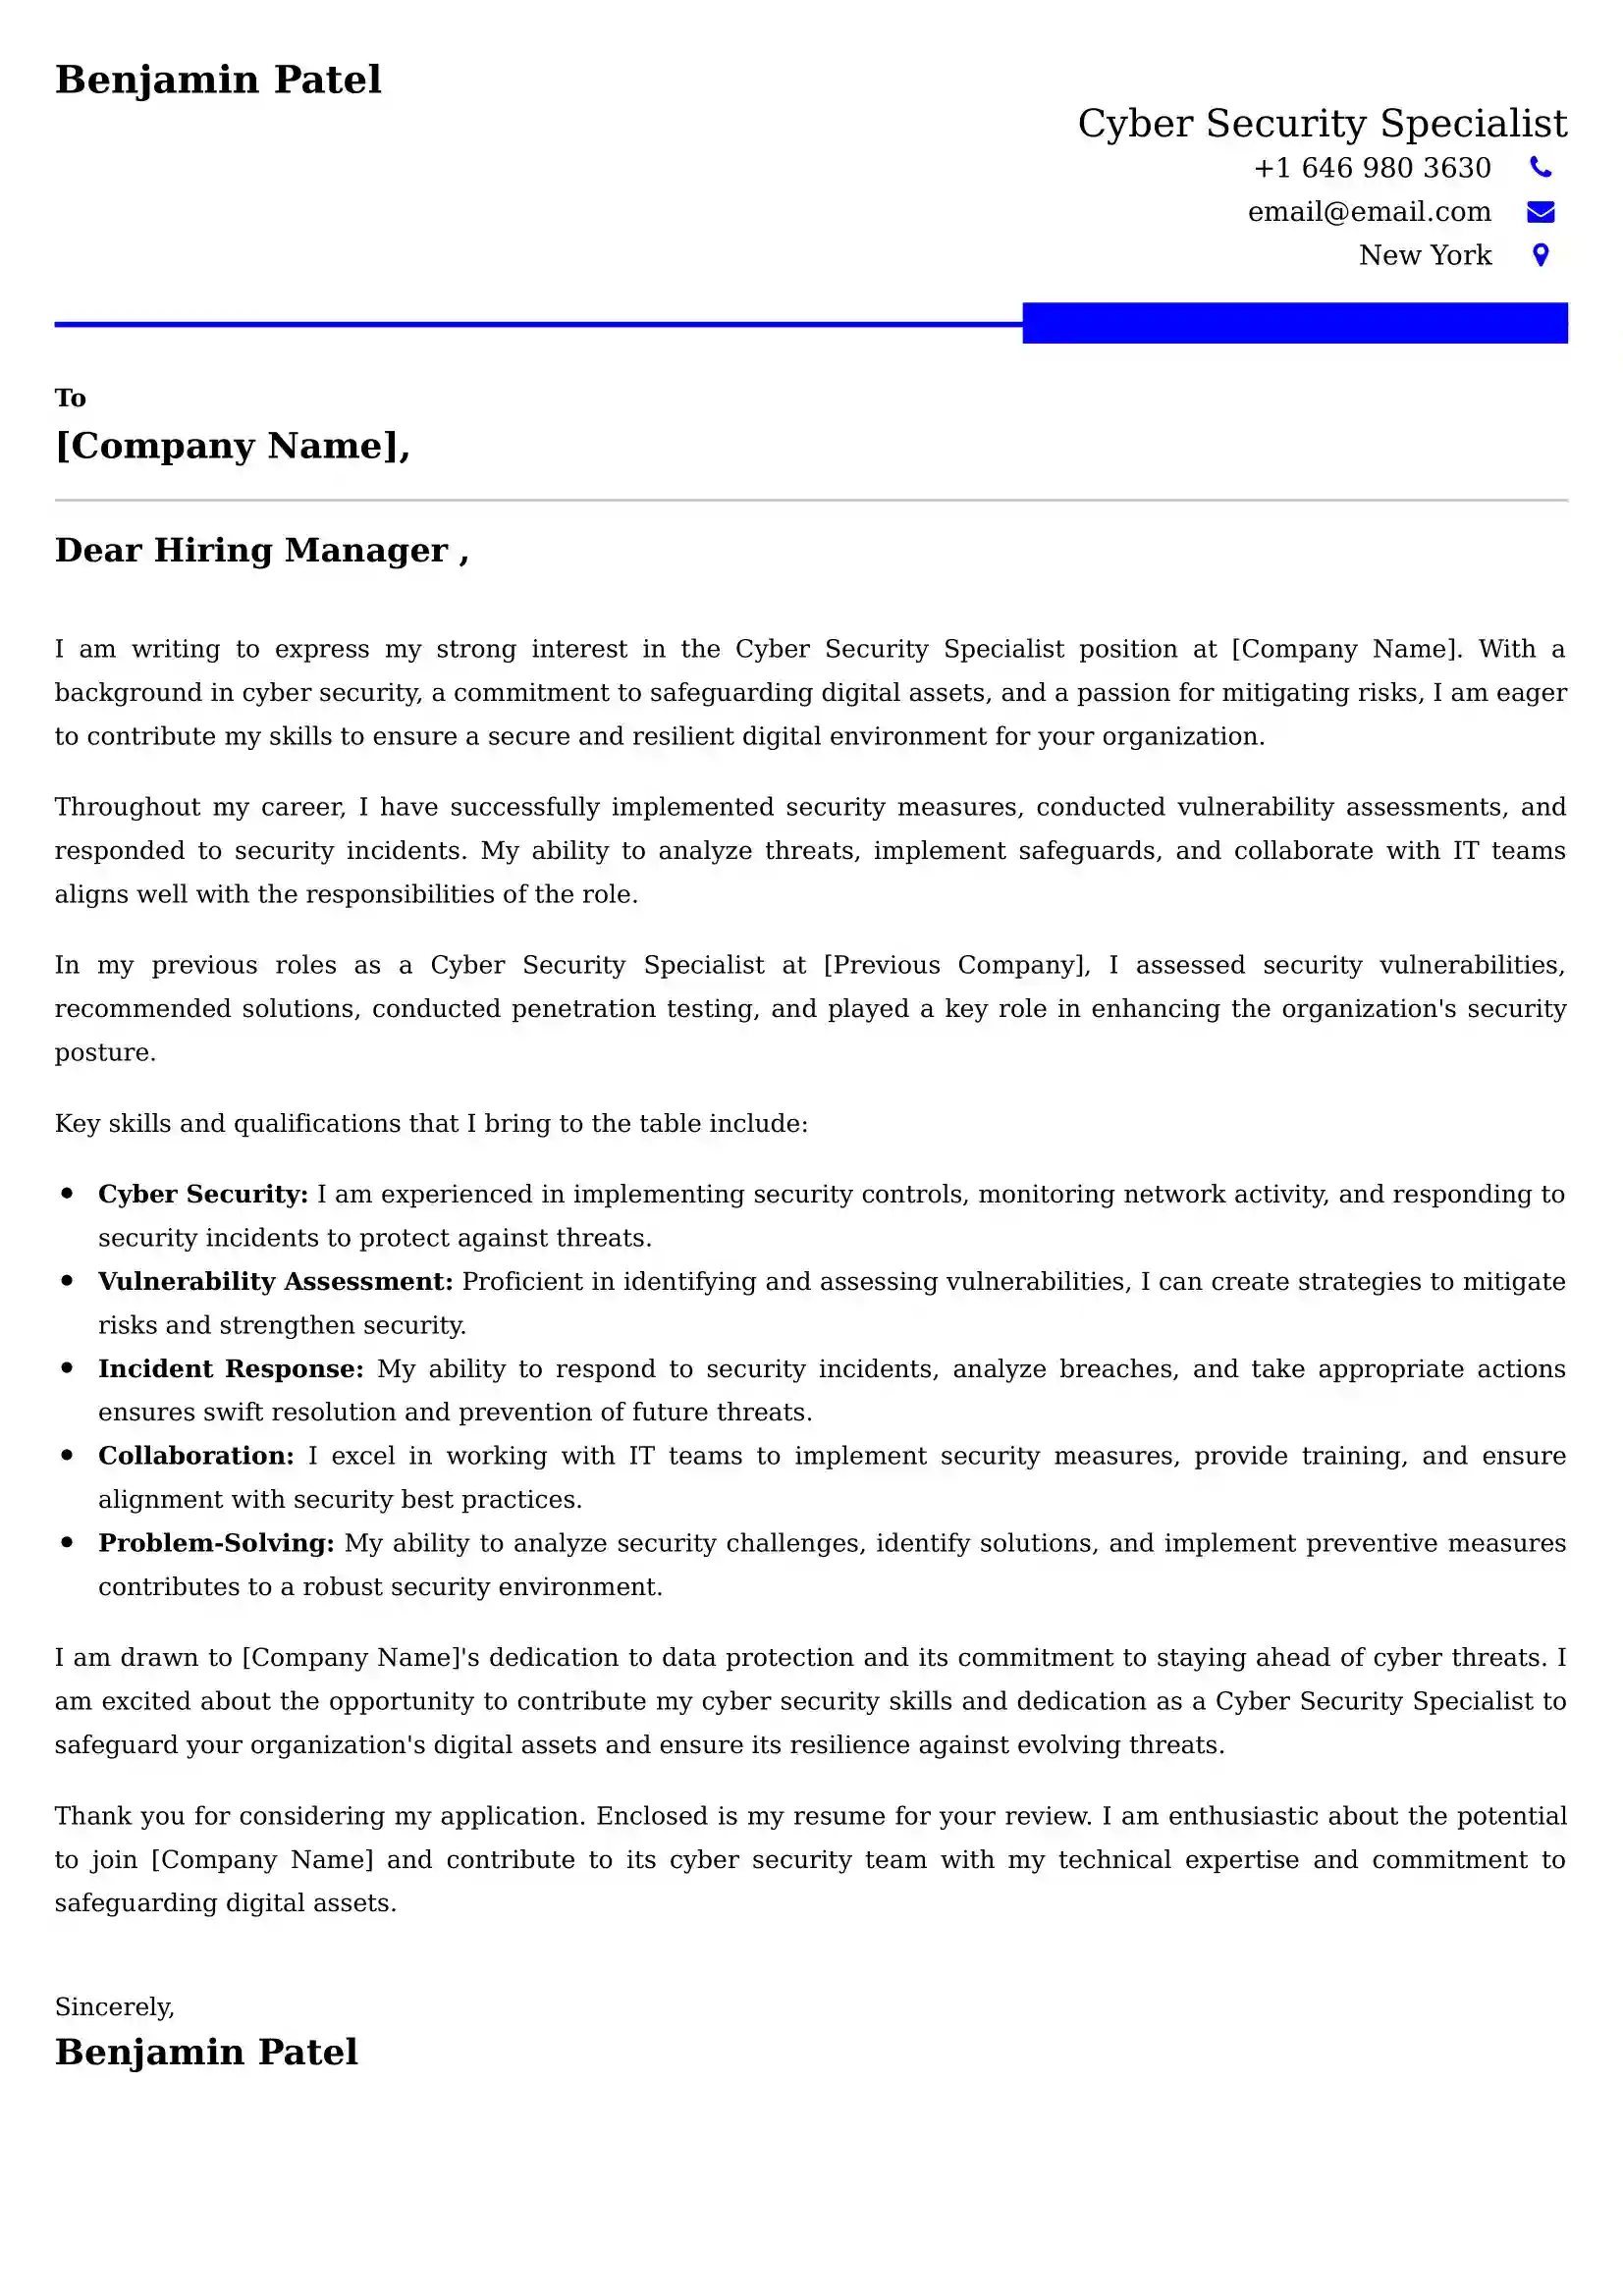 Cyber Security Specialist Cover Letter Sample